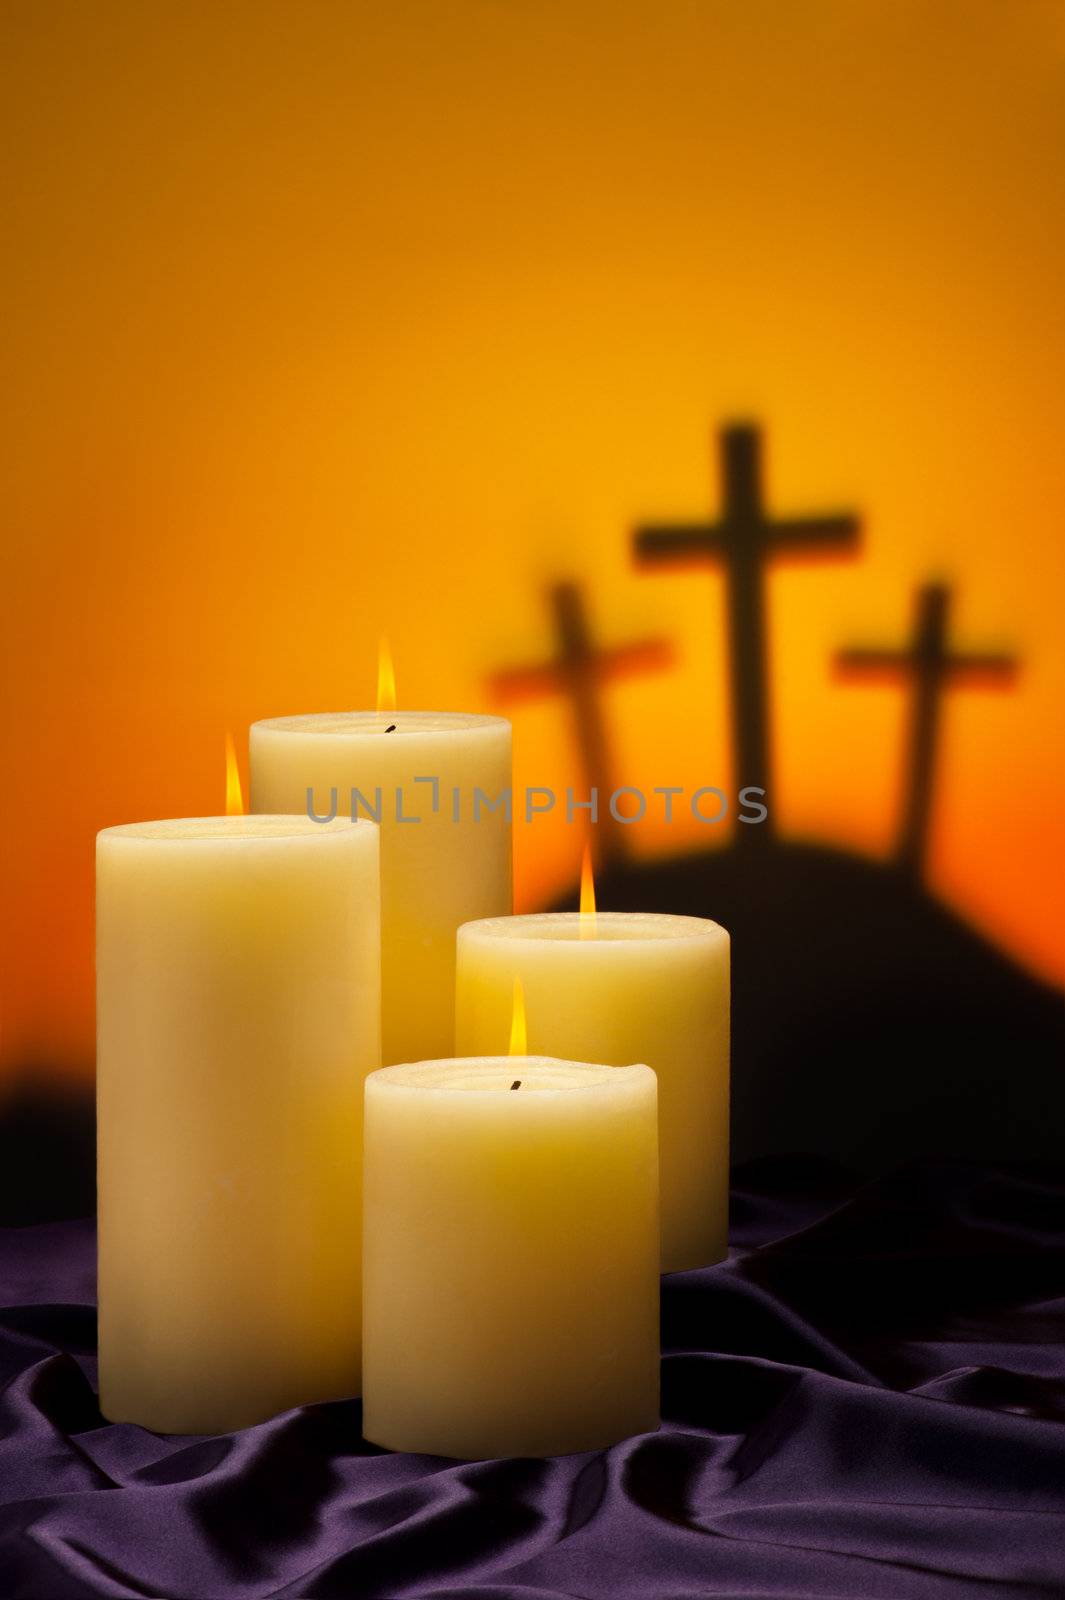 Three crosses symbolic for Jesus crucifixion in Golgotha and candles of hope